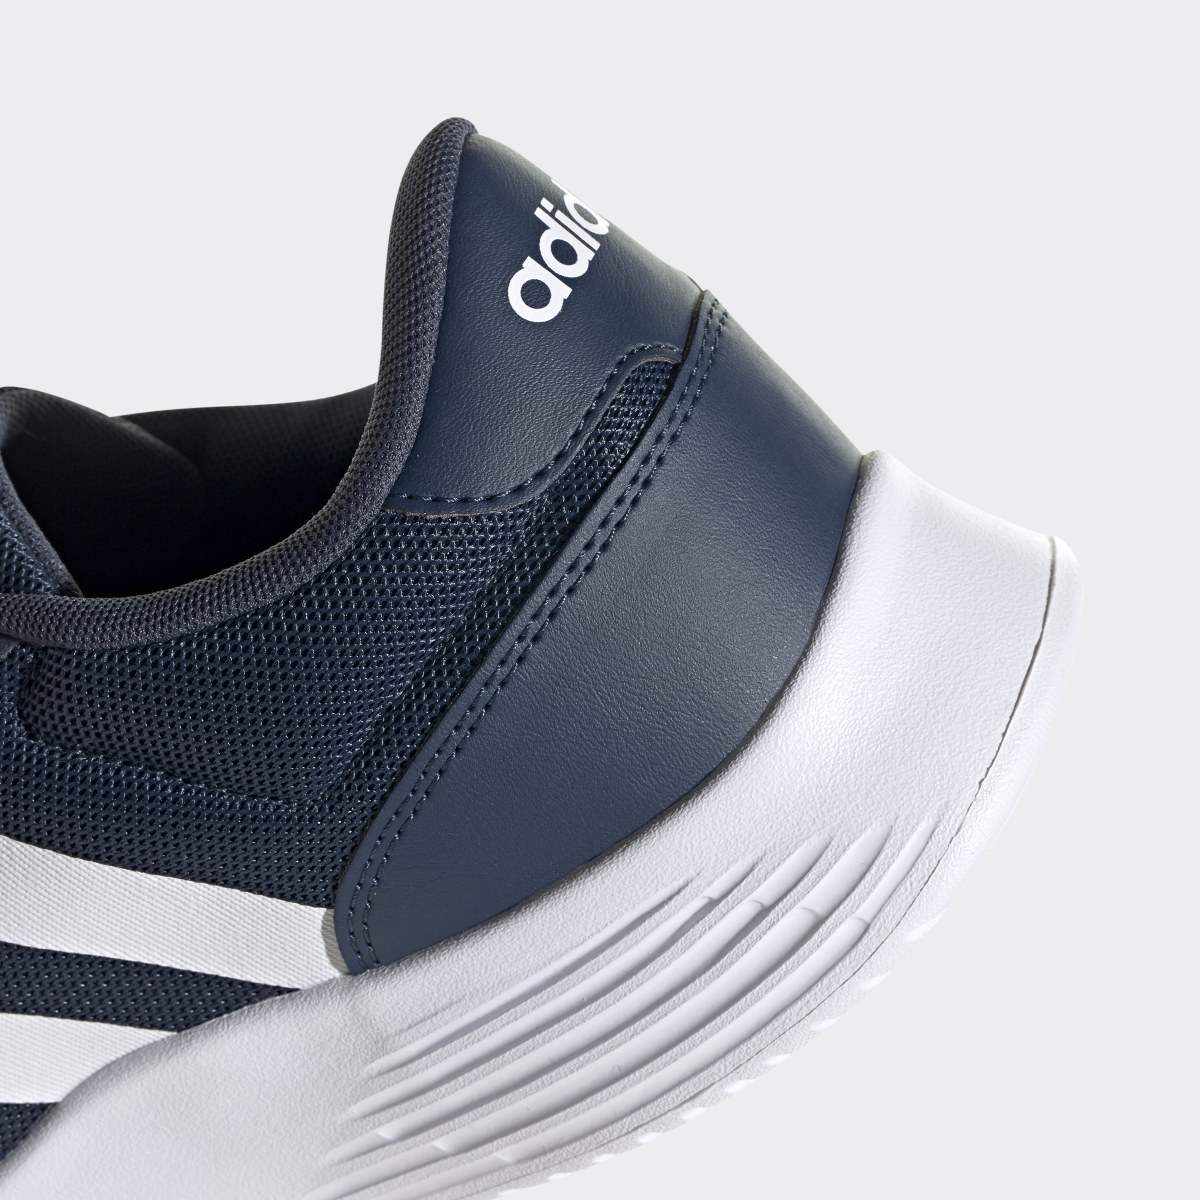 Adidas Lite Racer 2.0 Shoes. 9